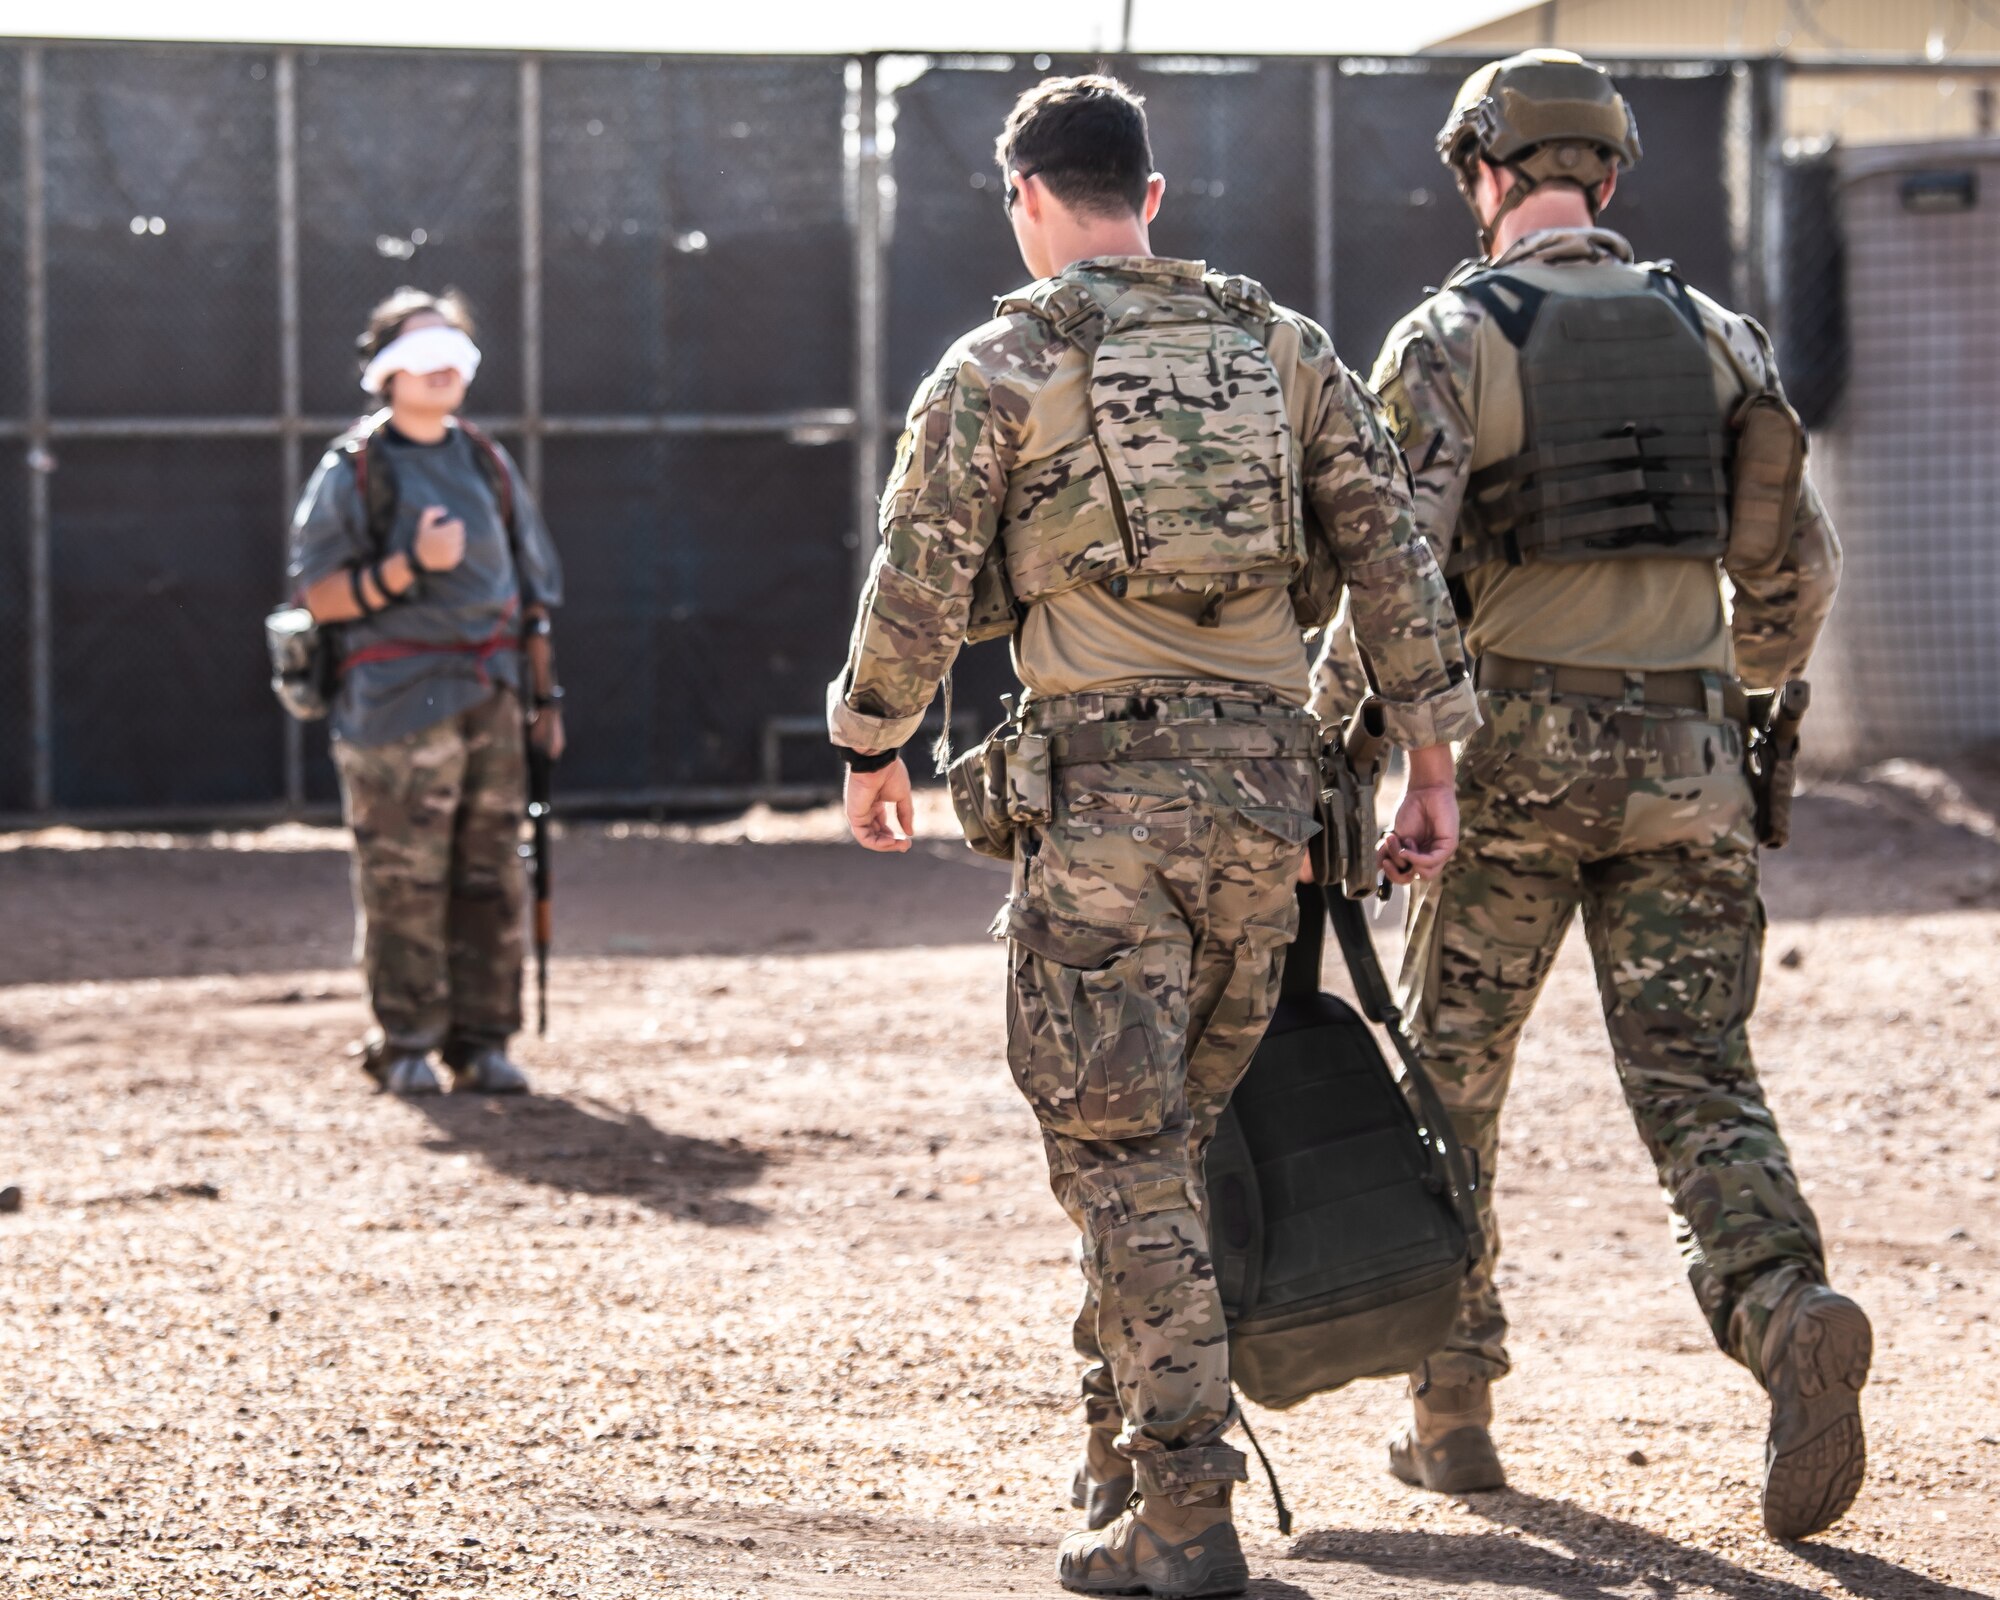 409th Explosive Ordnance Disposal technicians conduct hostage rescue exercise